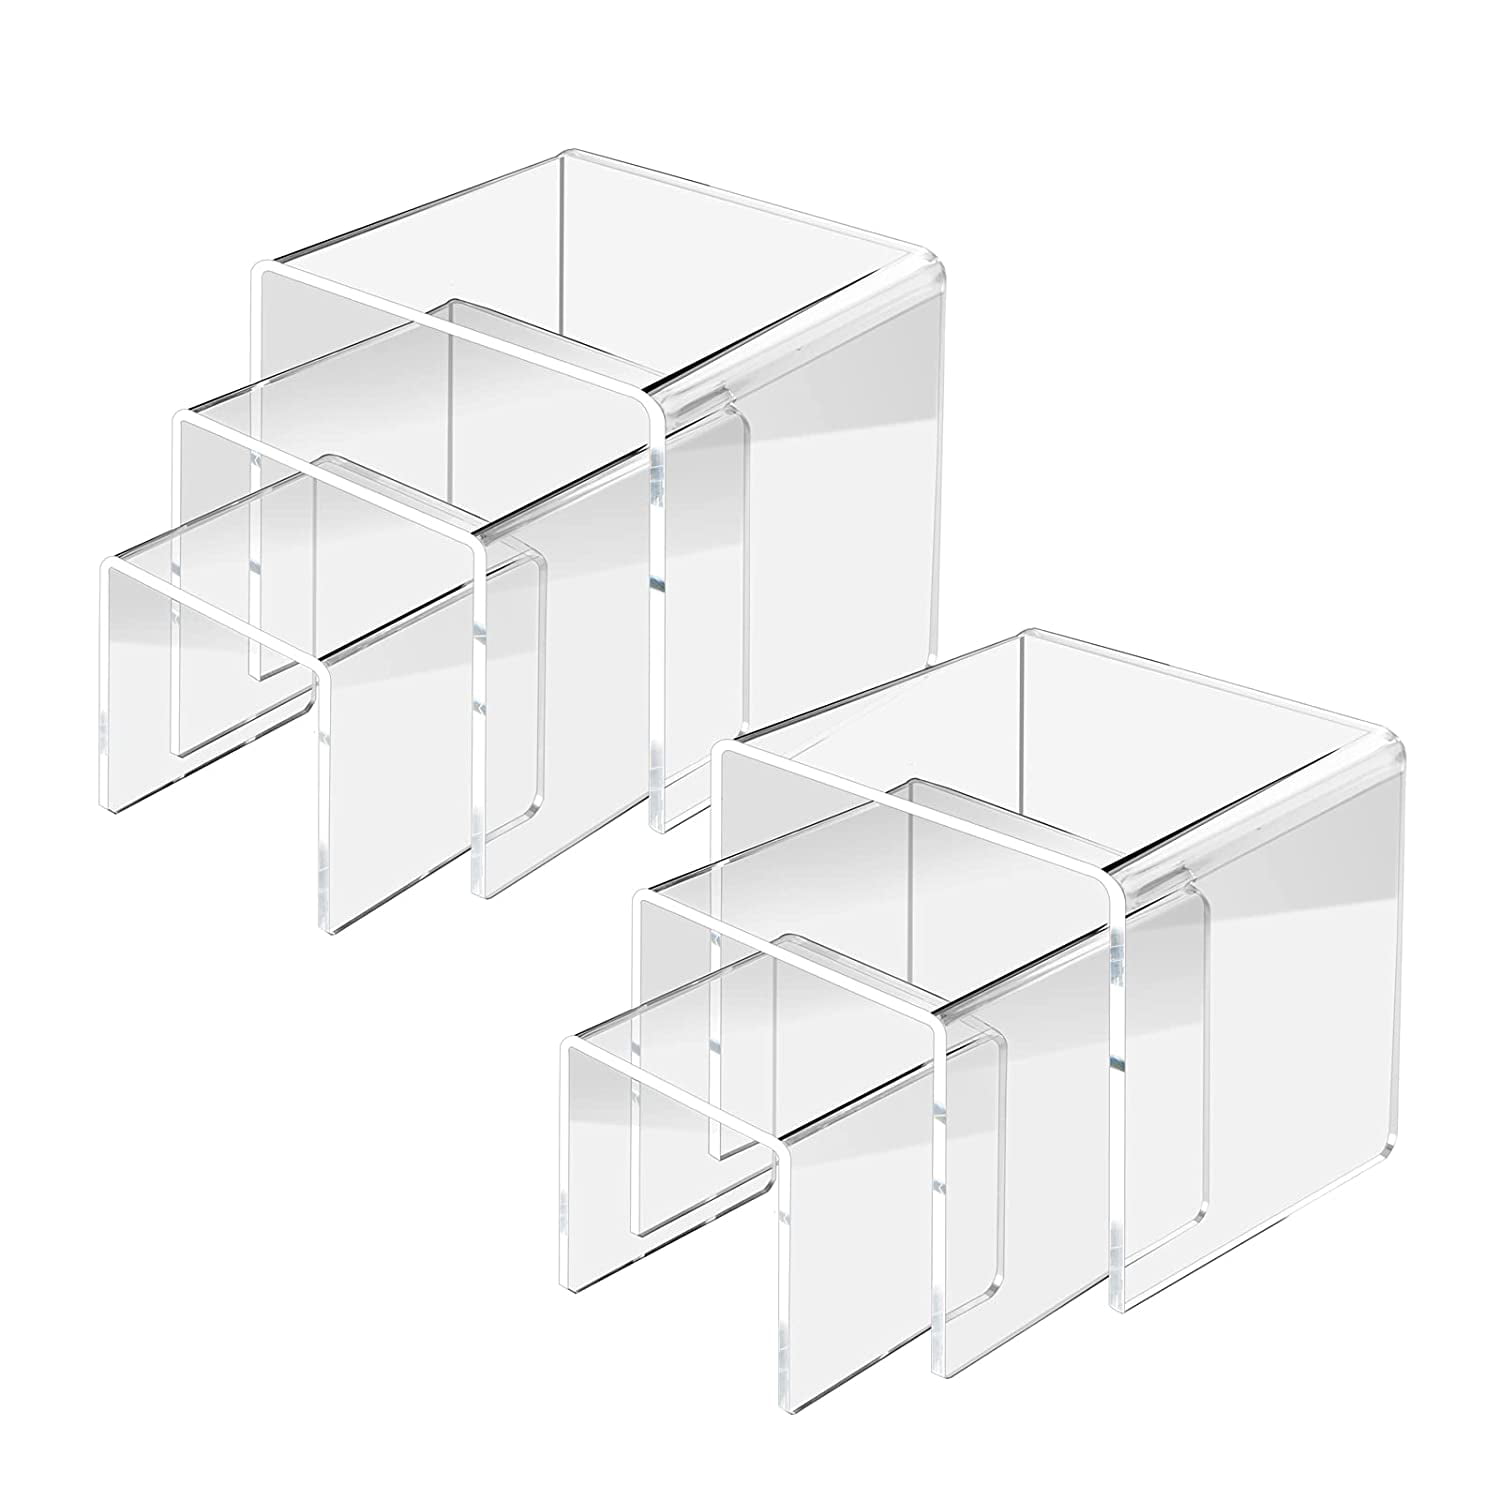 LOT OF 2 CLEAR ACRYLIC EARRING DISPLAY SET SHOWCASE DISPLAY COUNTER TOP STANDS 